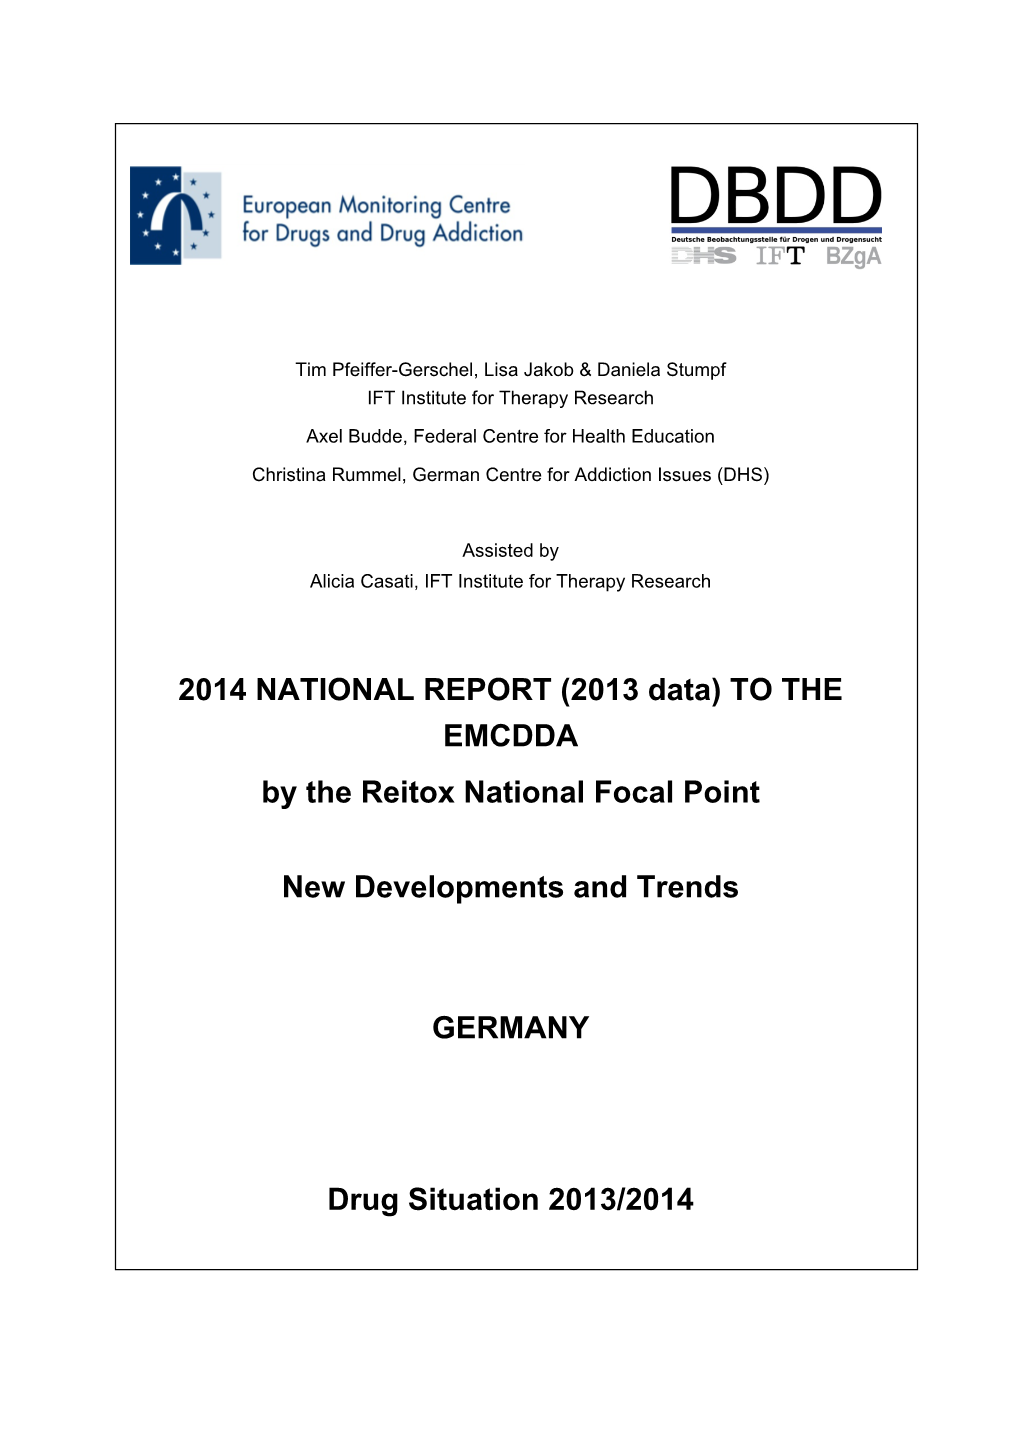 2014 NATIONAL REPORT (2013 Data) to the EMCDDA by the Reitox National Focal Point New Developments and Trends GERMANY Drug